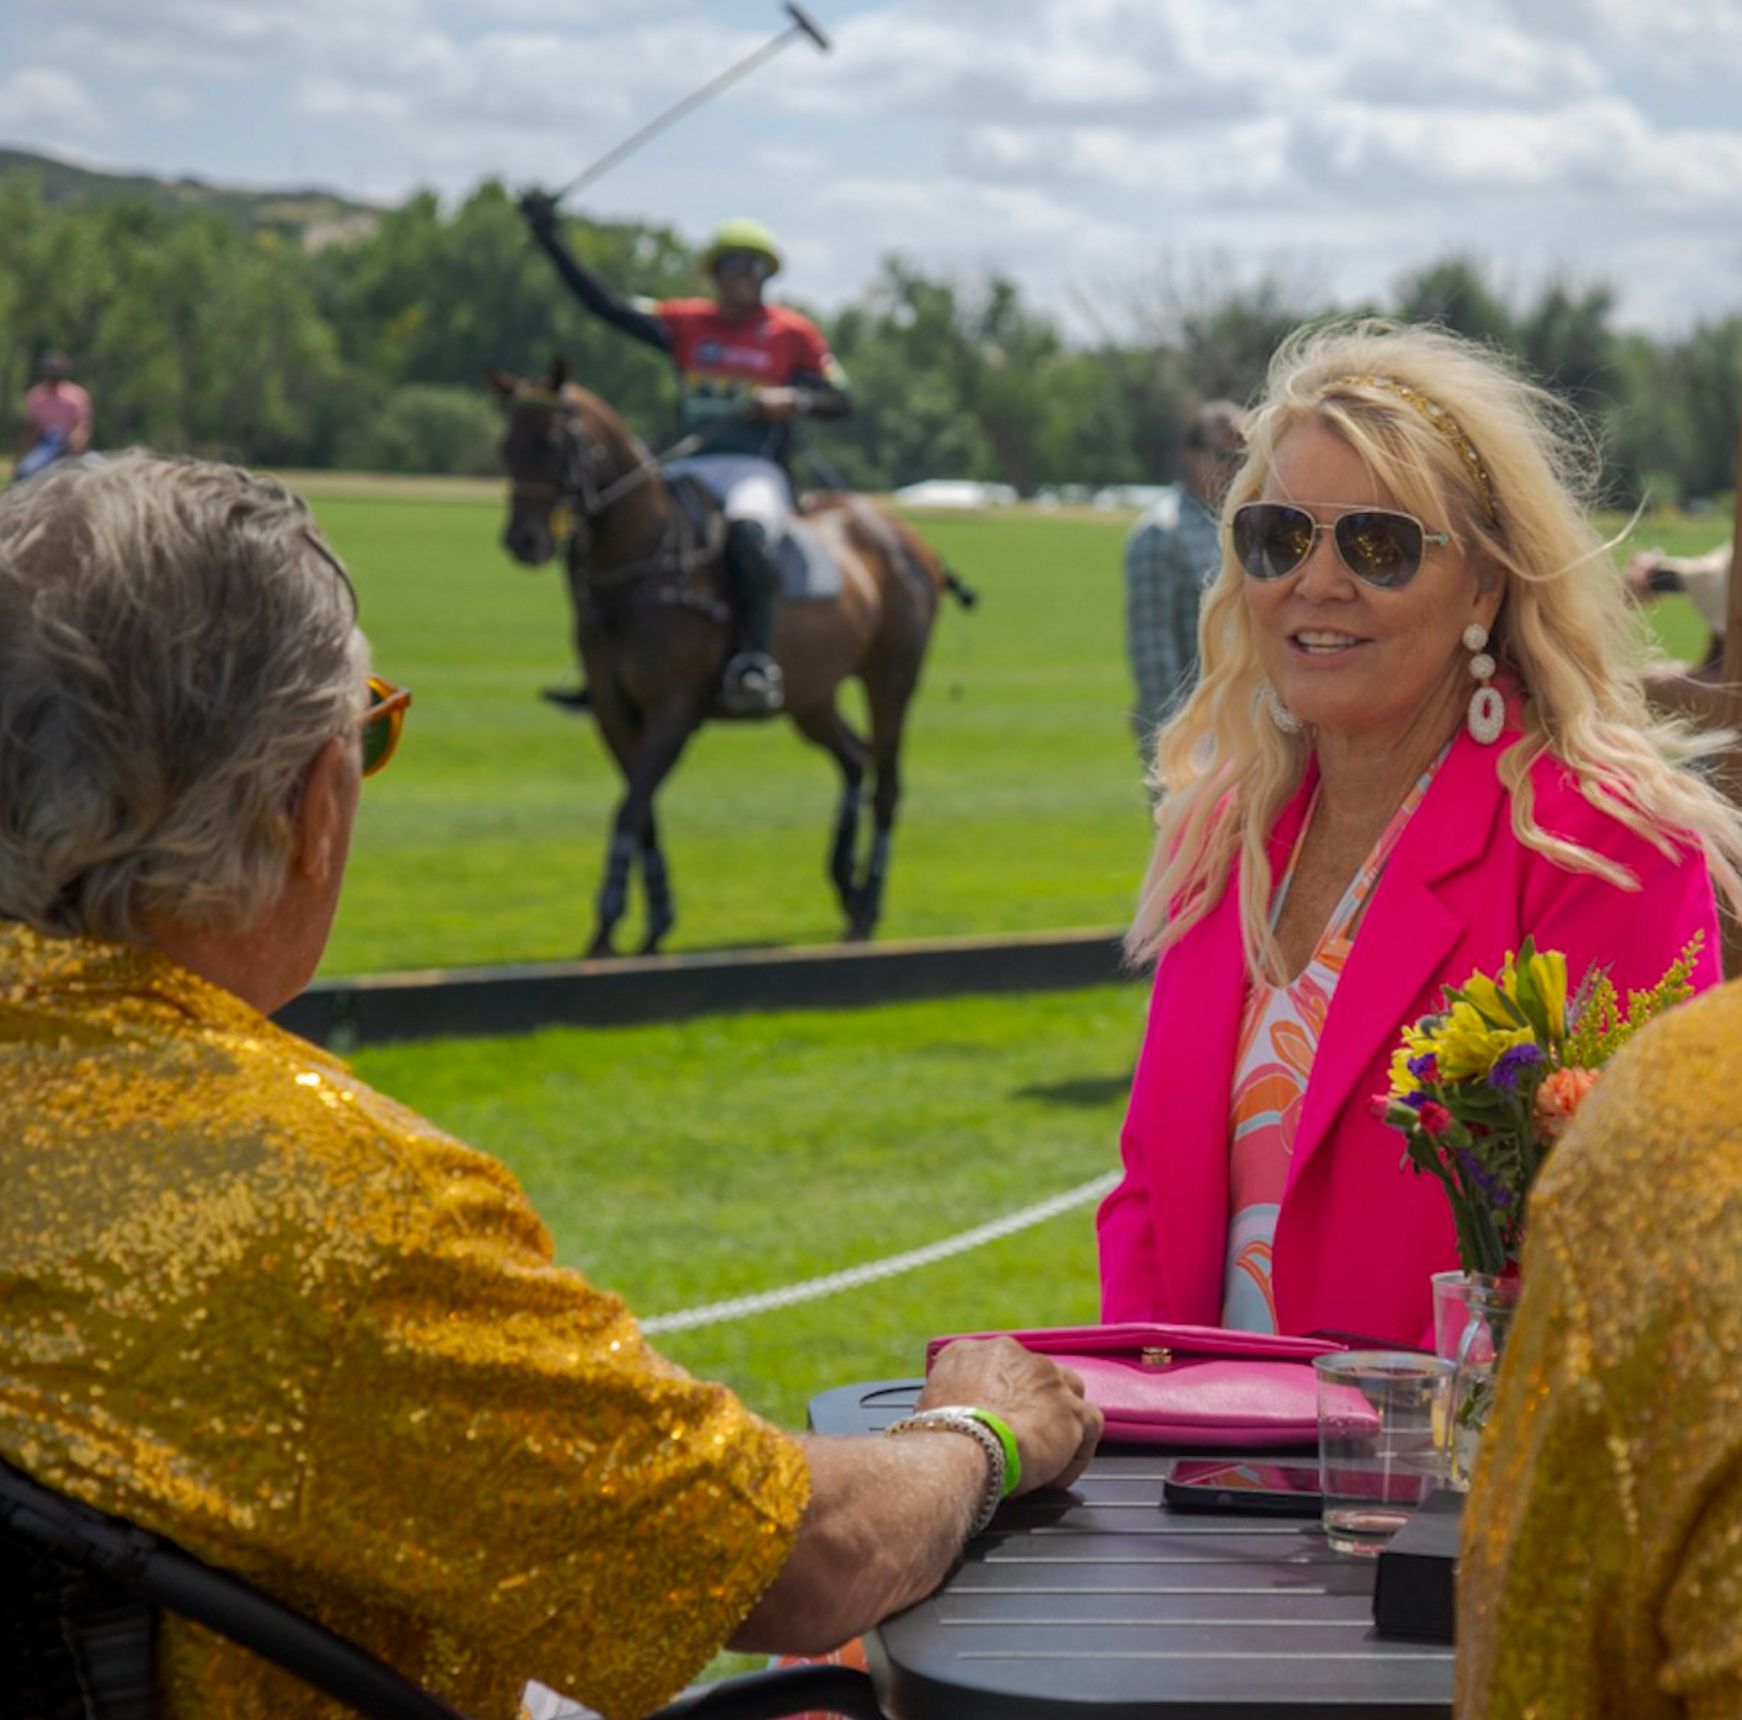 A woman in a pink jacket is sitting at a table watching a man on a horse